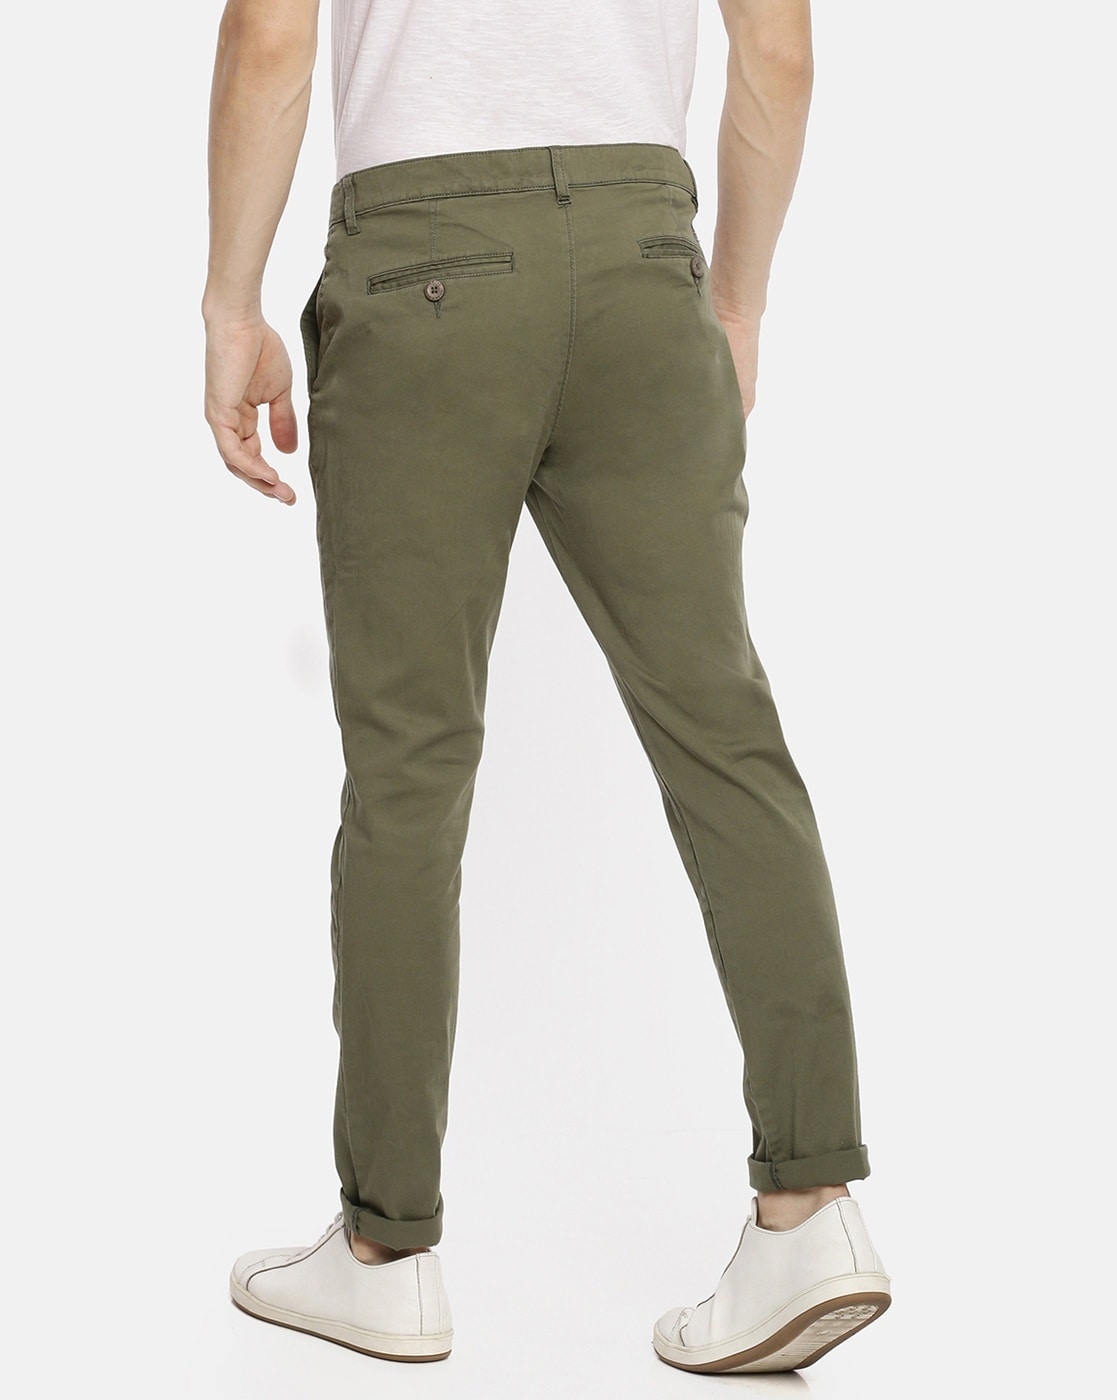 Moh India Pants  Buy Moh India Gul Trousers Online  Nykaa Fashion